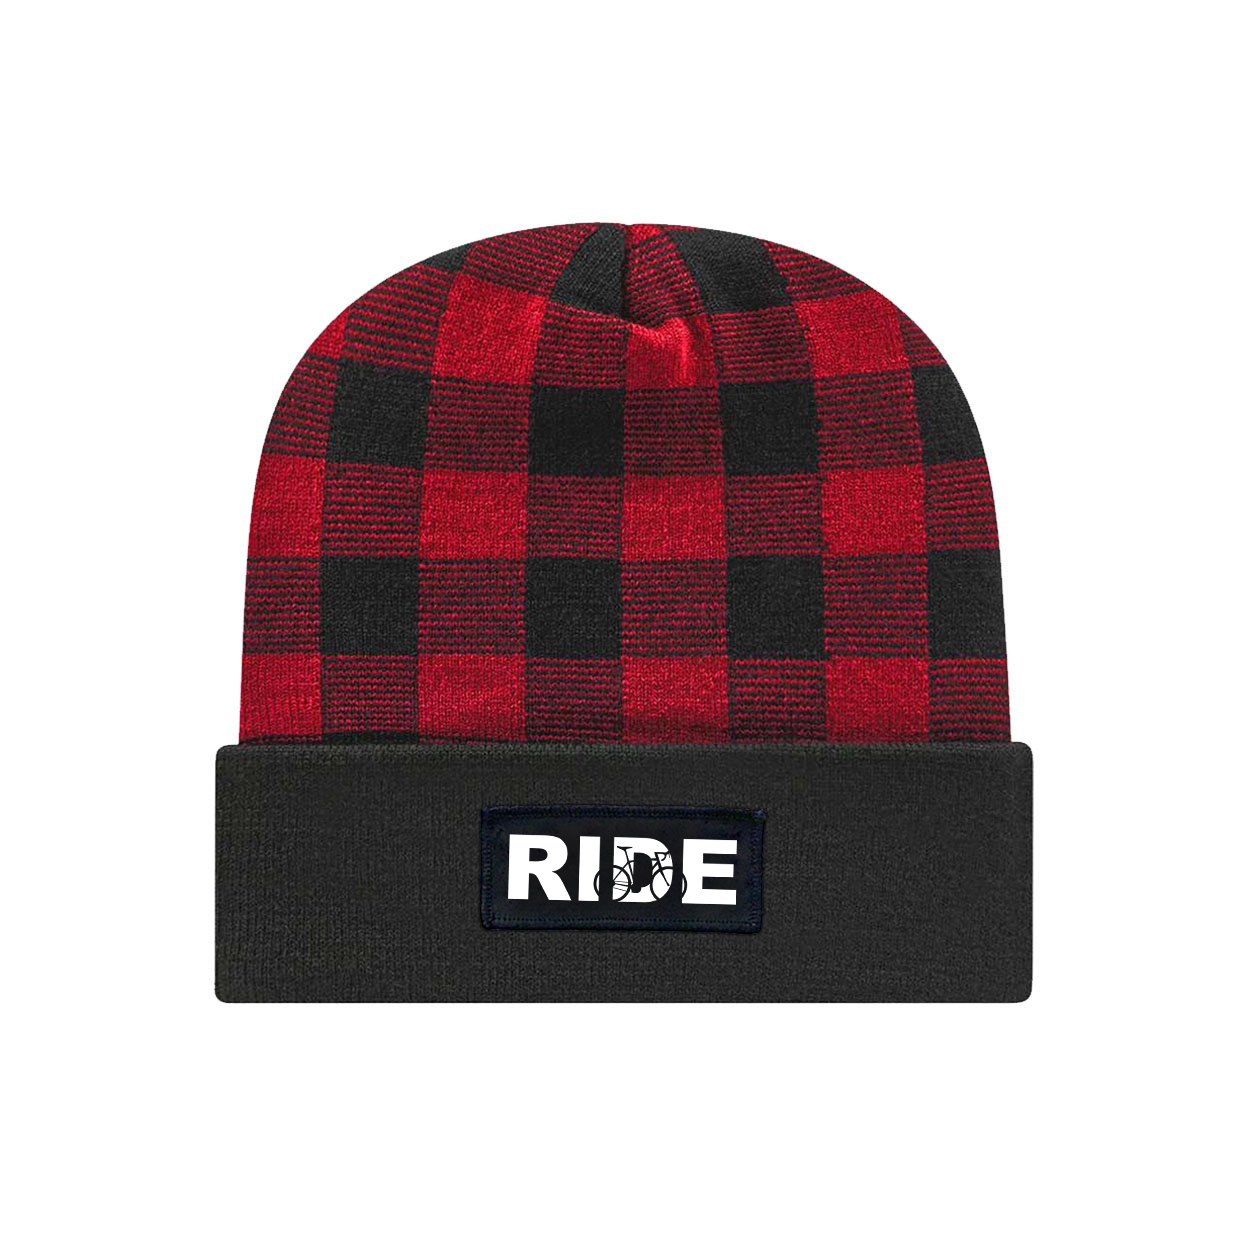 Ride Cycle Logo Night Out Woven Patch Roll Up Plaid Beanie Black/True Red (White Logo)